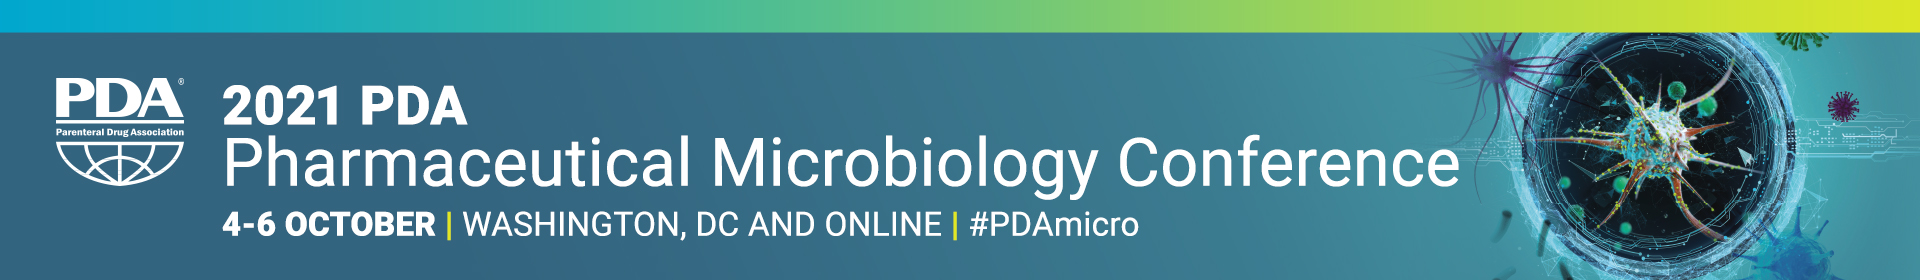 2021 PDA Pharmaceutical Microbiology Conference Event Banner